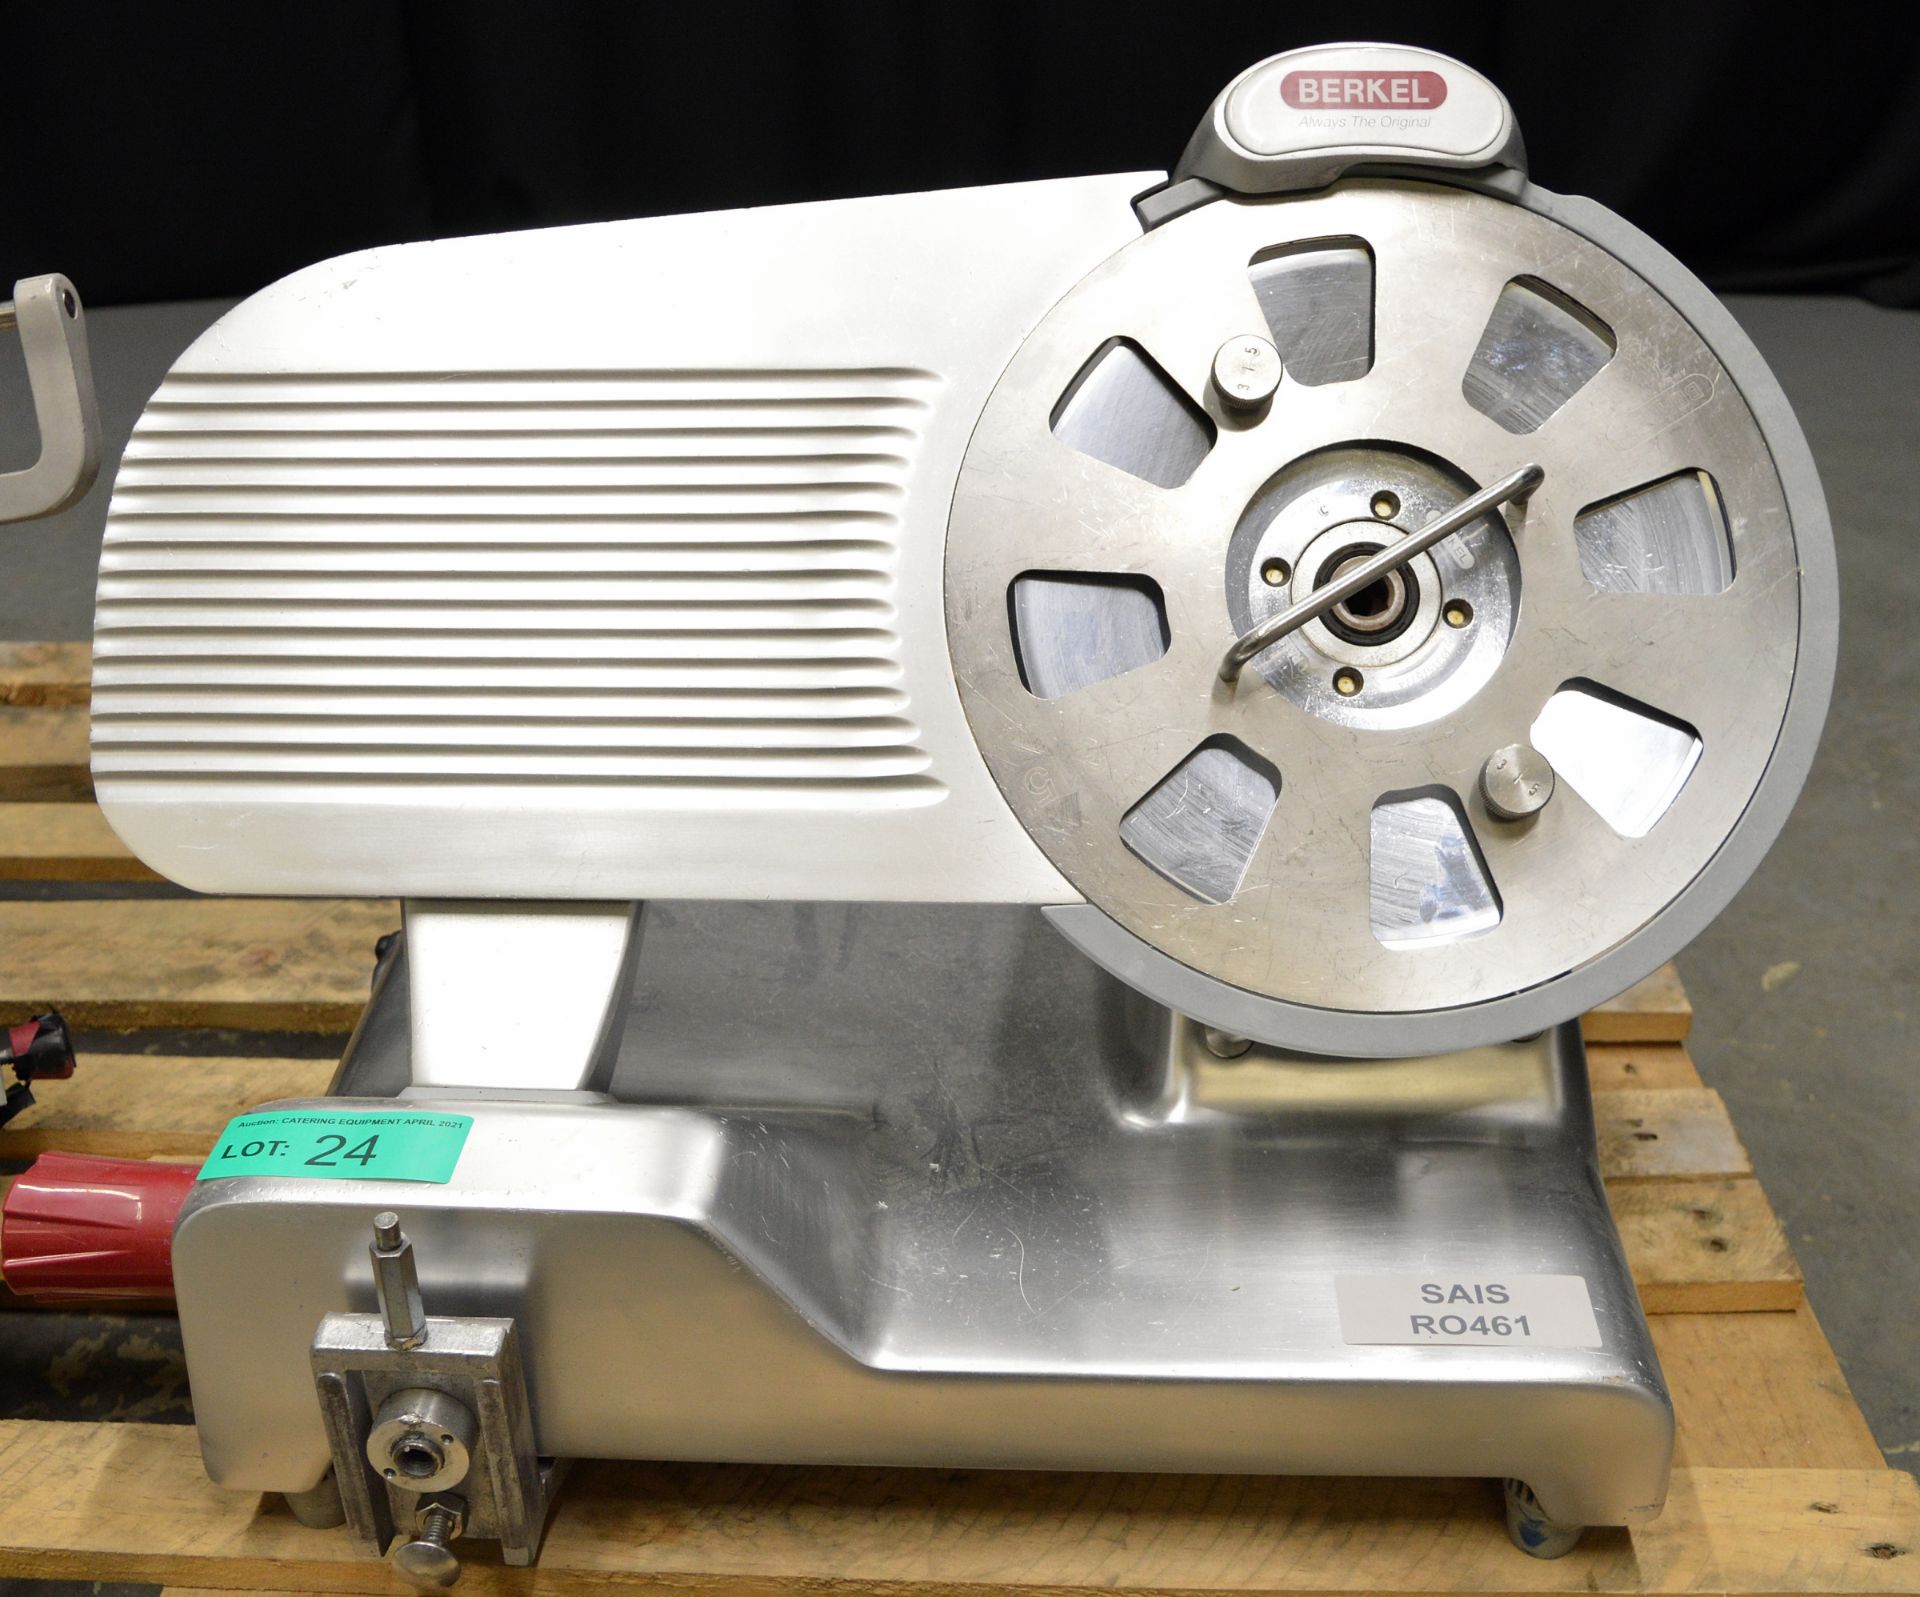 Berkel BSPGL04011A0F 12" Commercial Cooked Meat / Bacon Slicer, single phase electric - Image 2 of 9